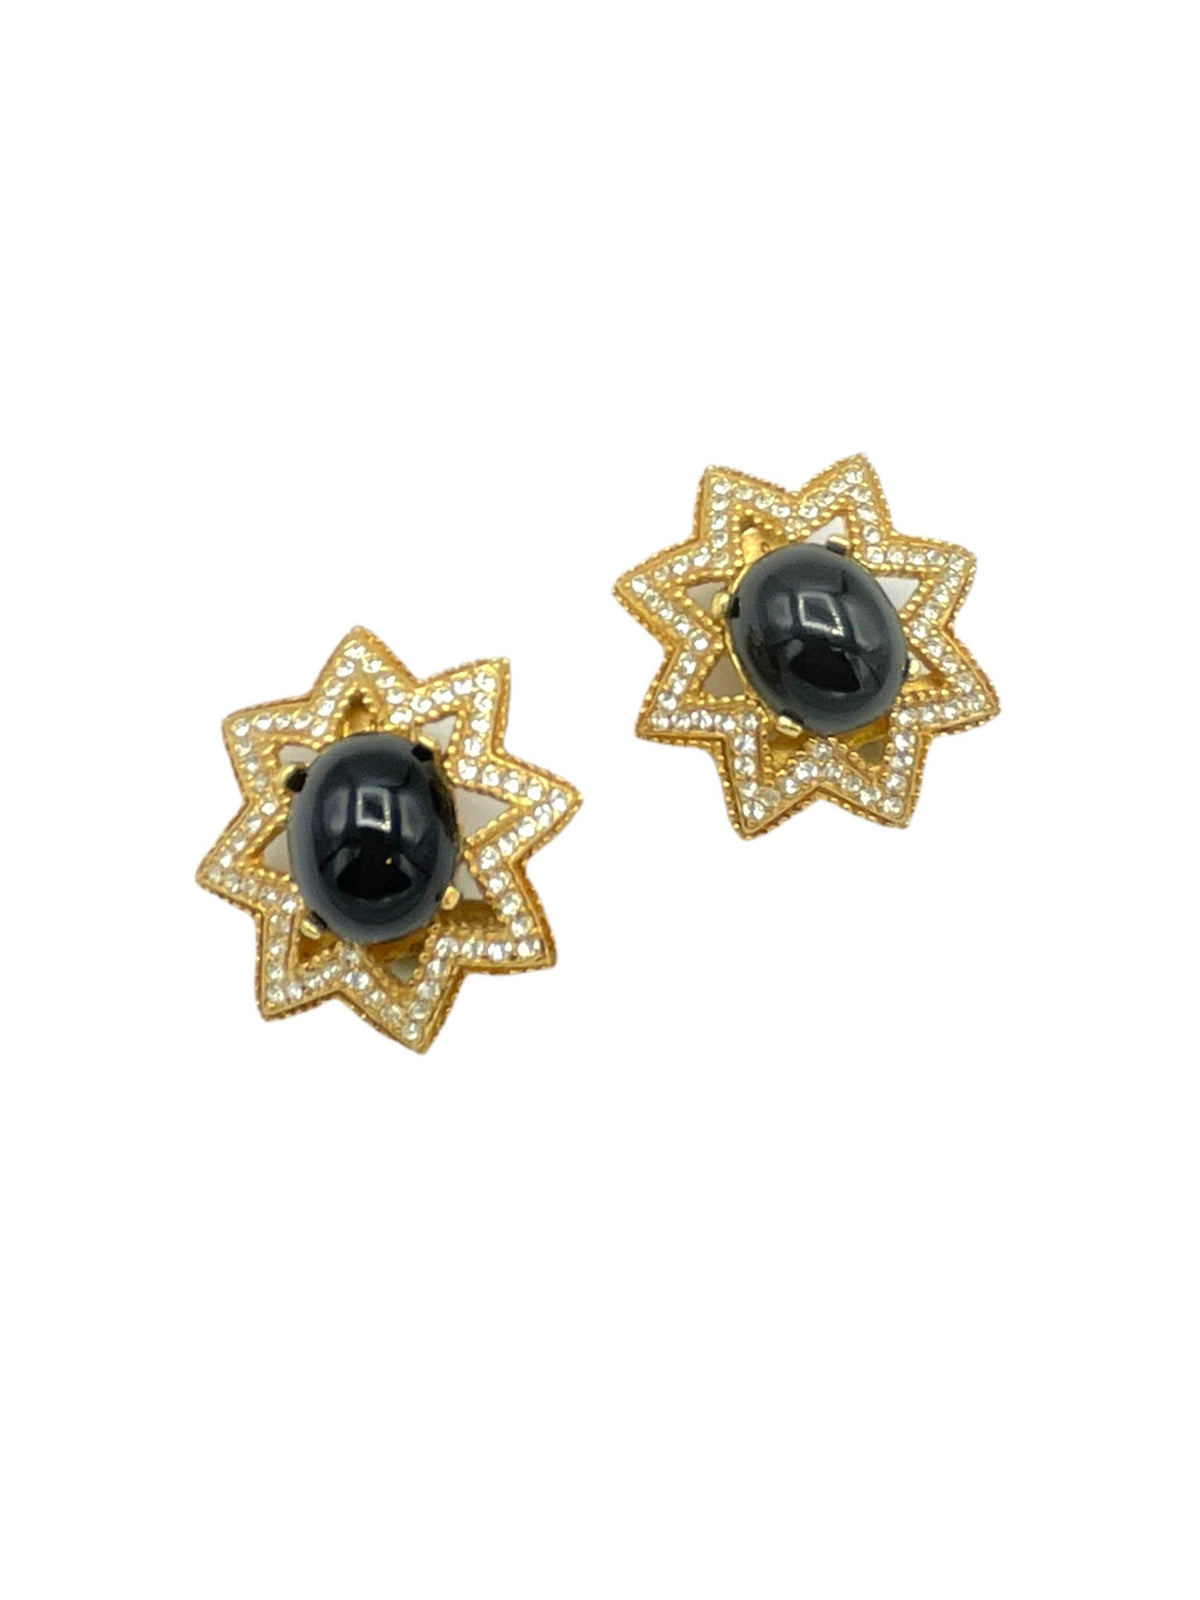 Ciner Gold Black Cabochon Rhinestone Vintage Statement Clip-On Earrings - 24 Wishes Vintage Jewelry